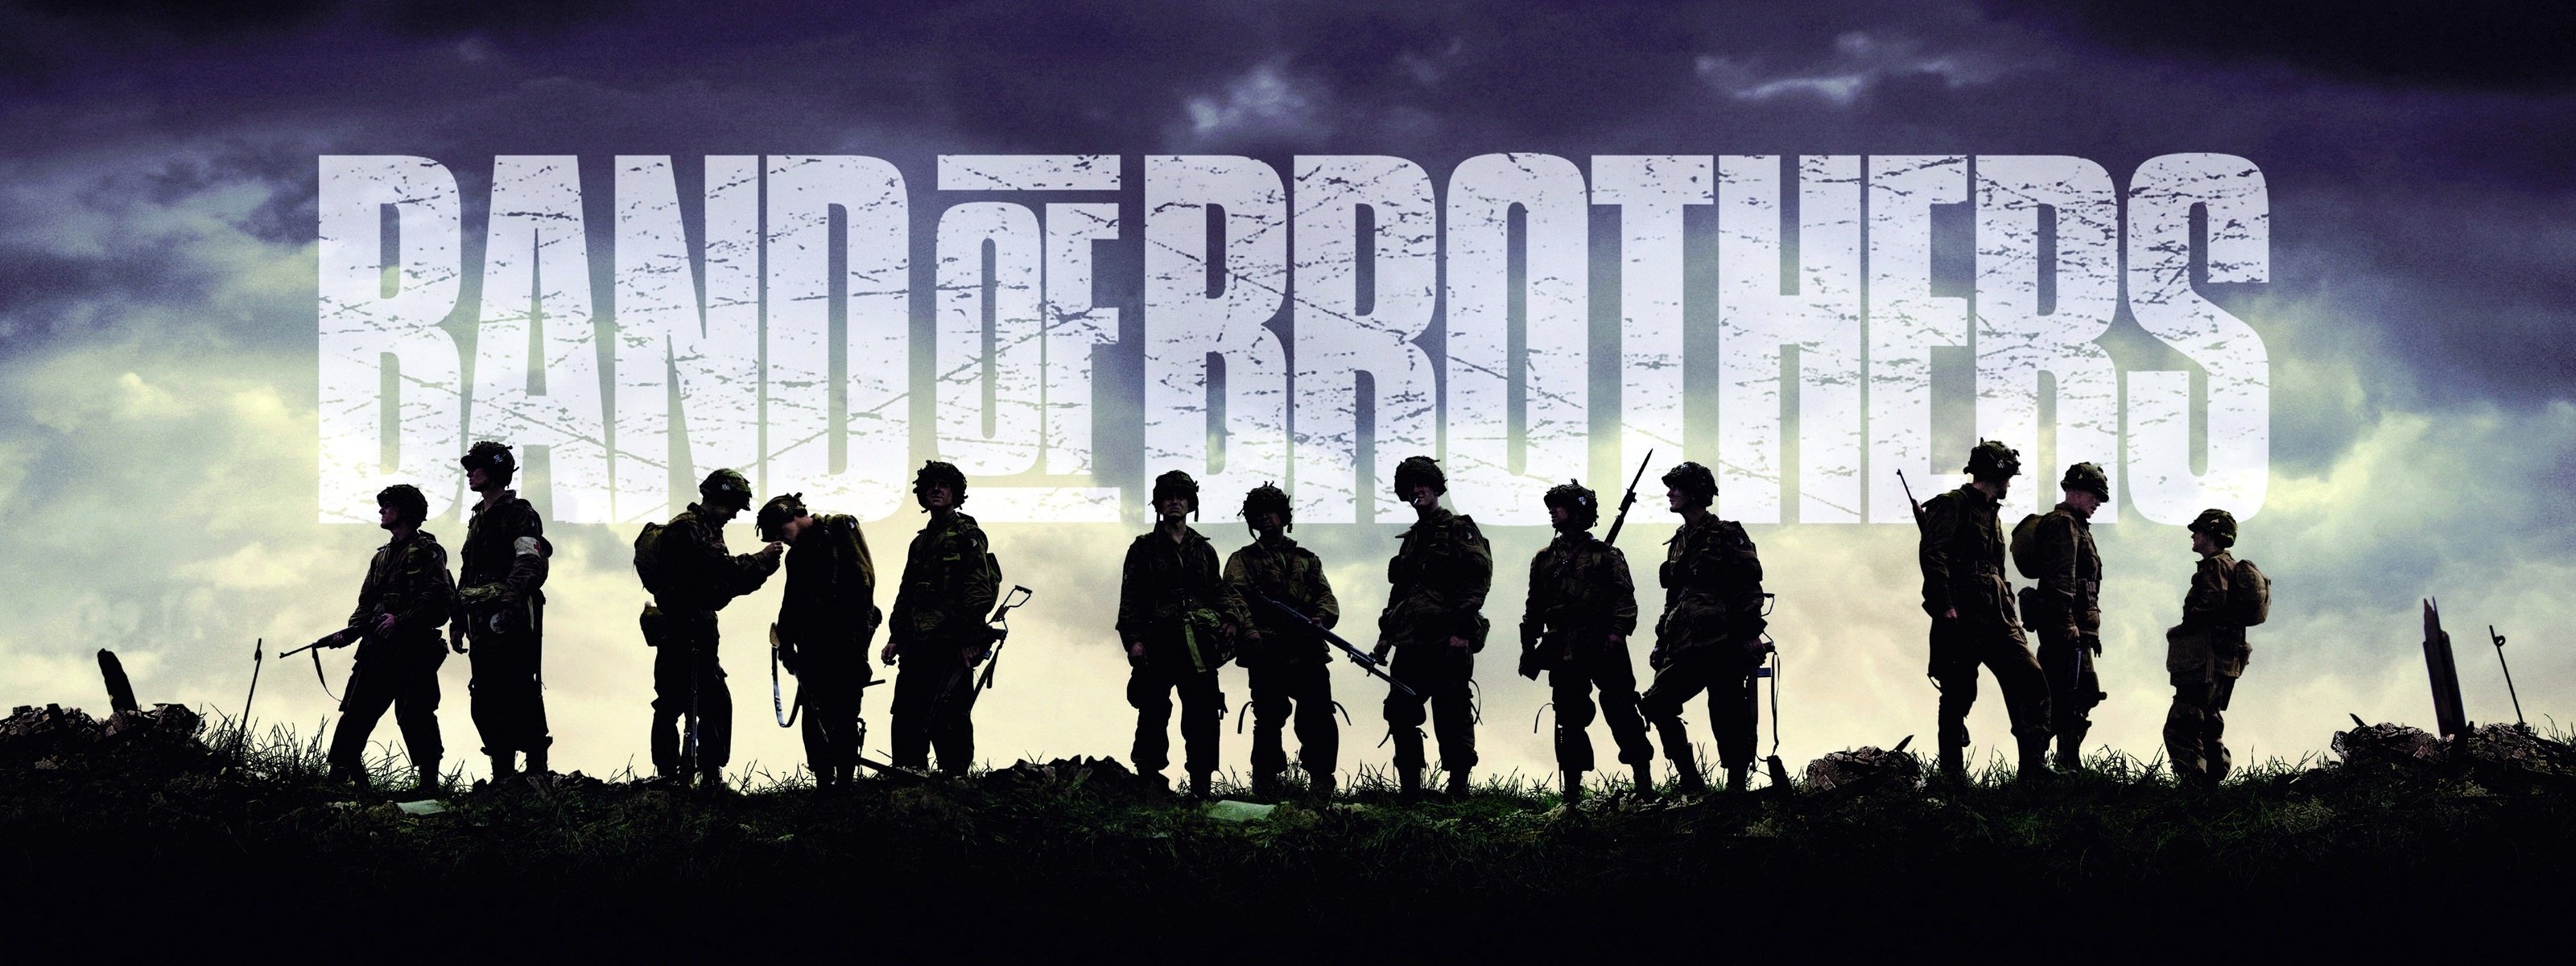 Download dual monitor 3200x1200 Band Of Brothers desktop wallpaper ID:246941 for free